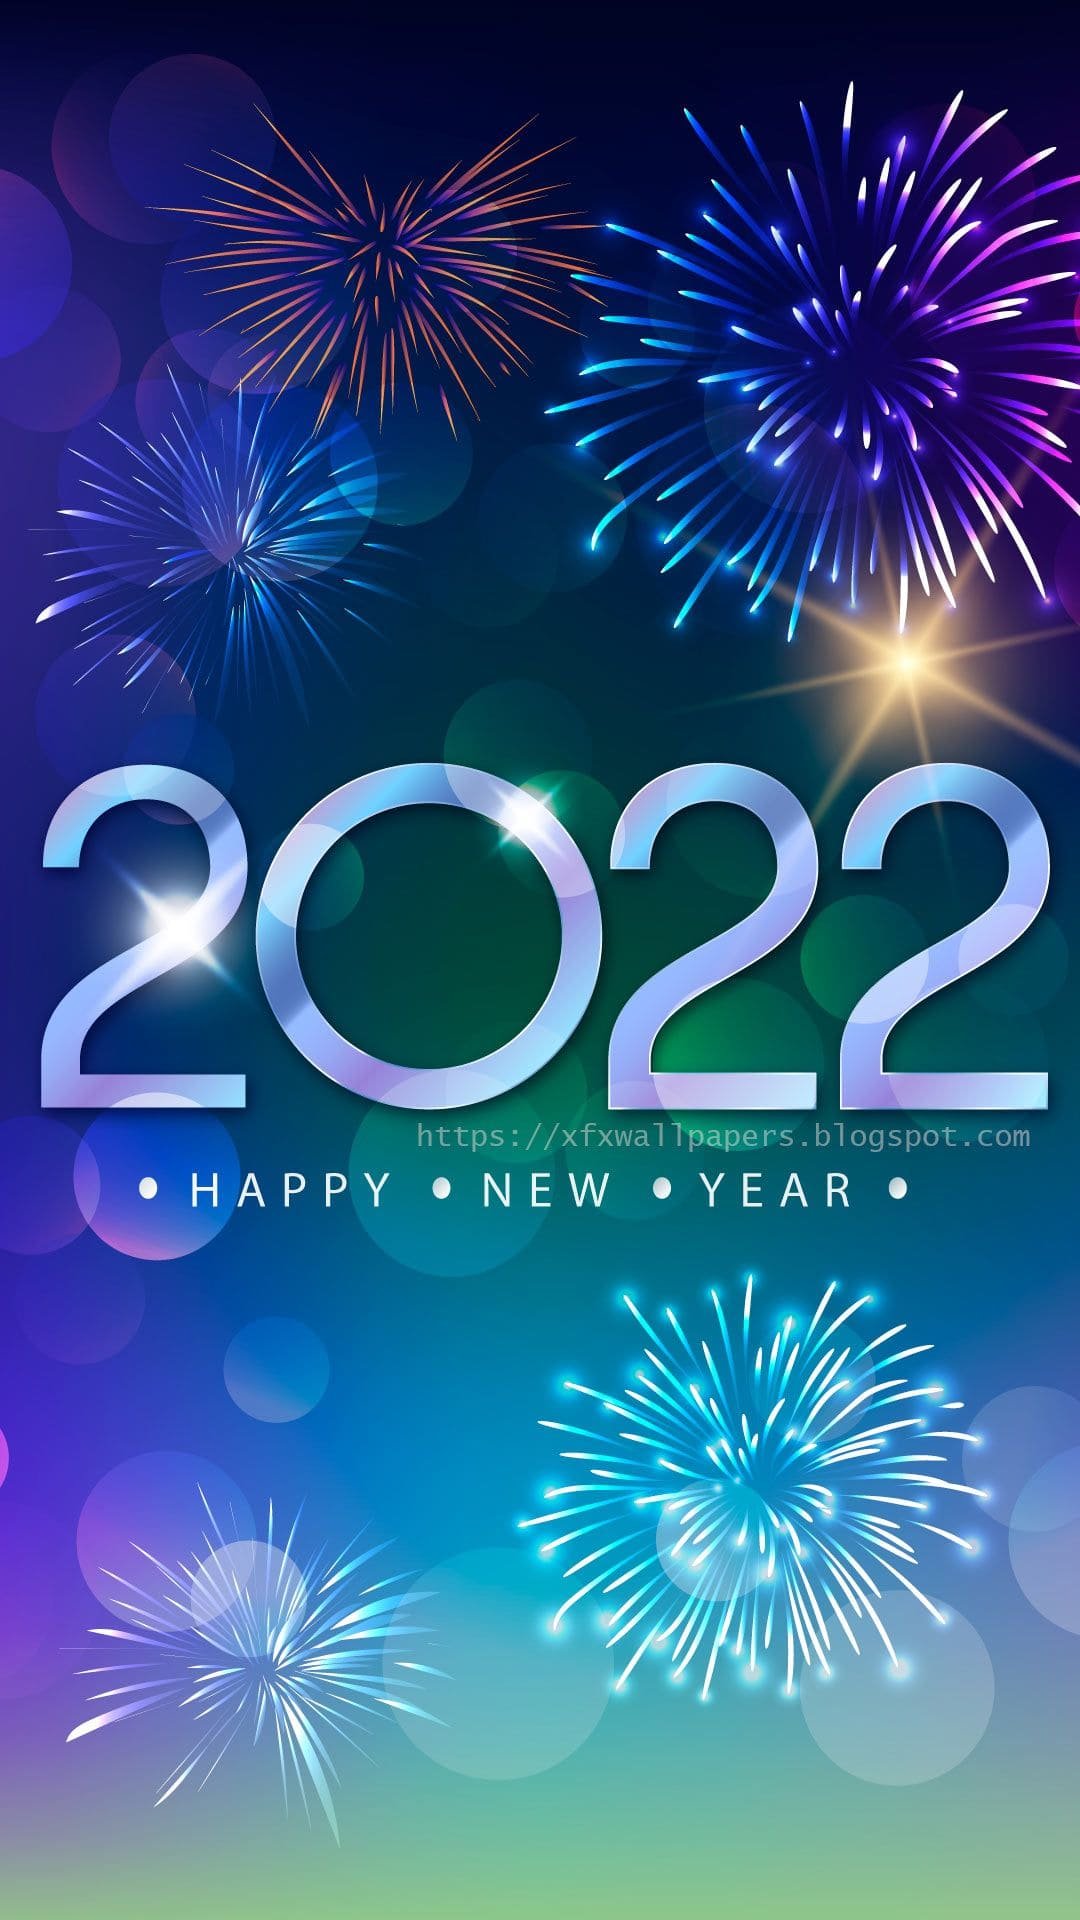 happy new year 2022 images and Wallpaper iphone